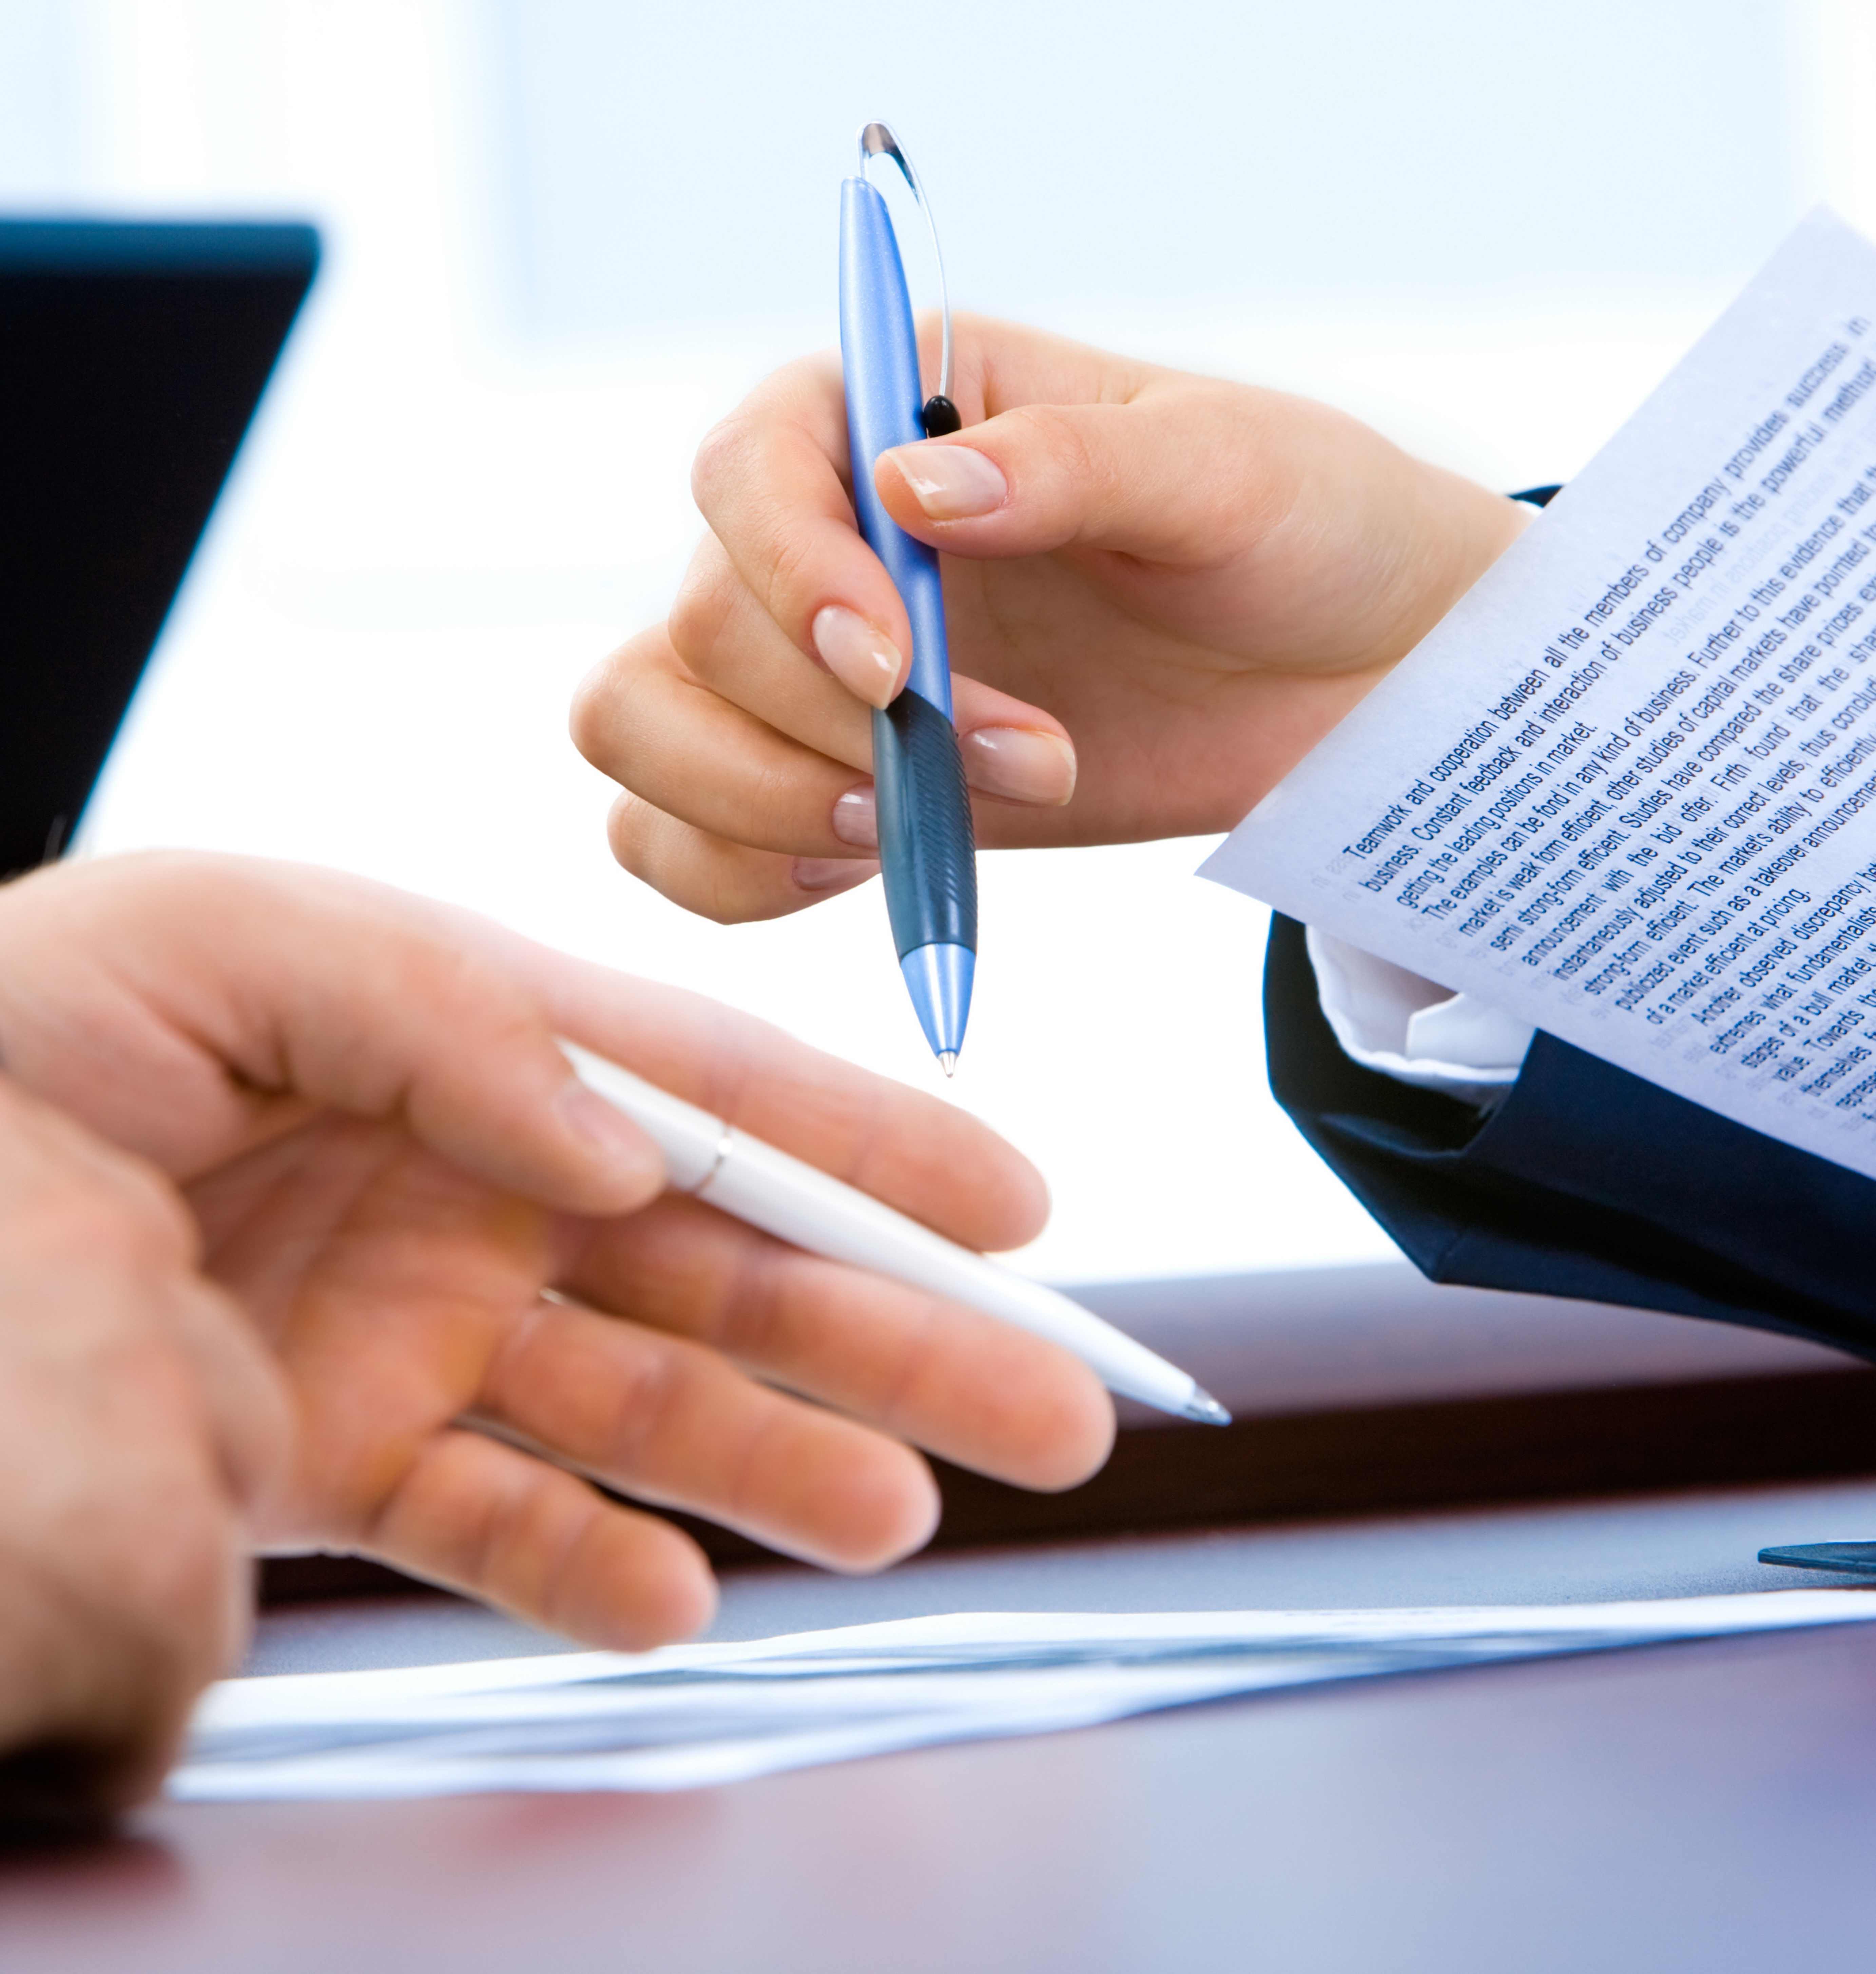 One male and one female hand holding pens and paper, in a business scene